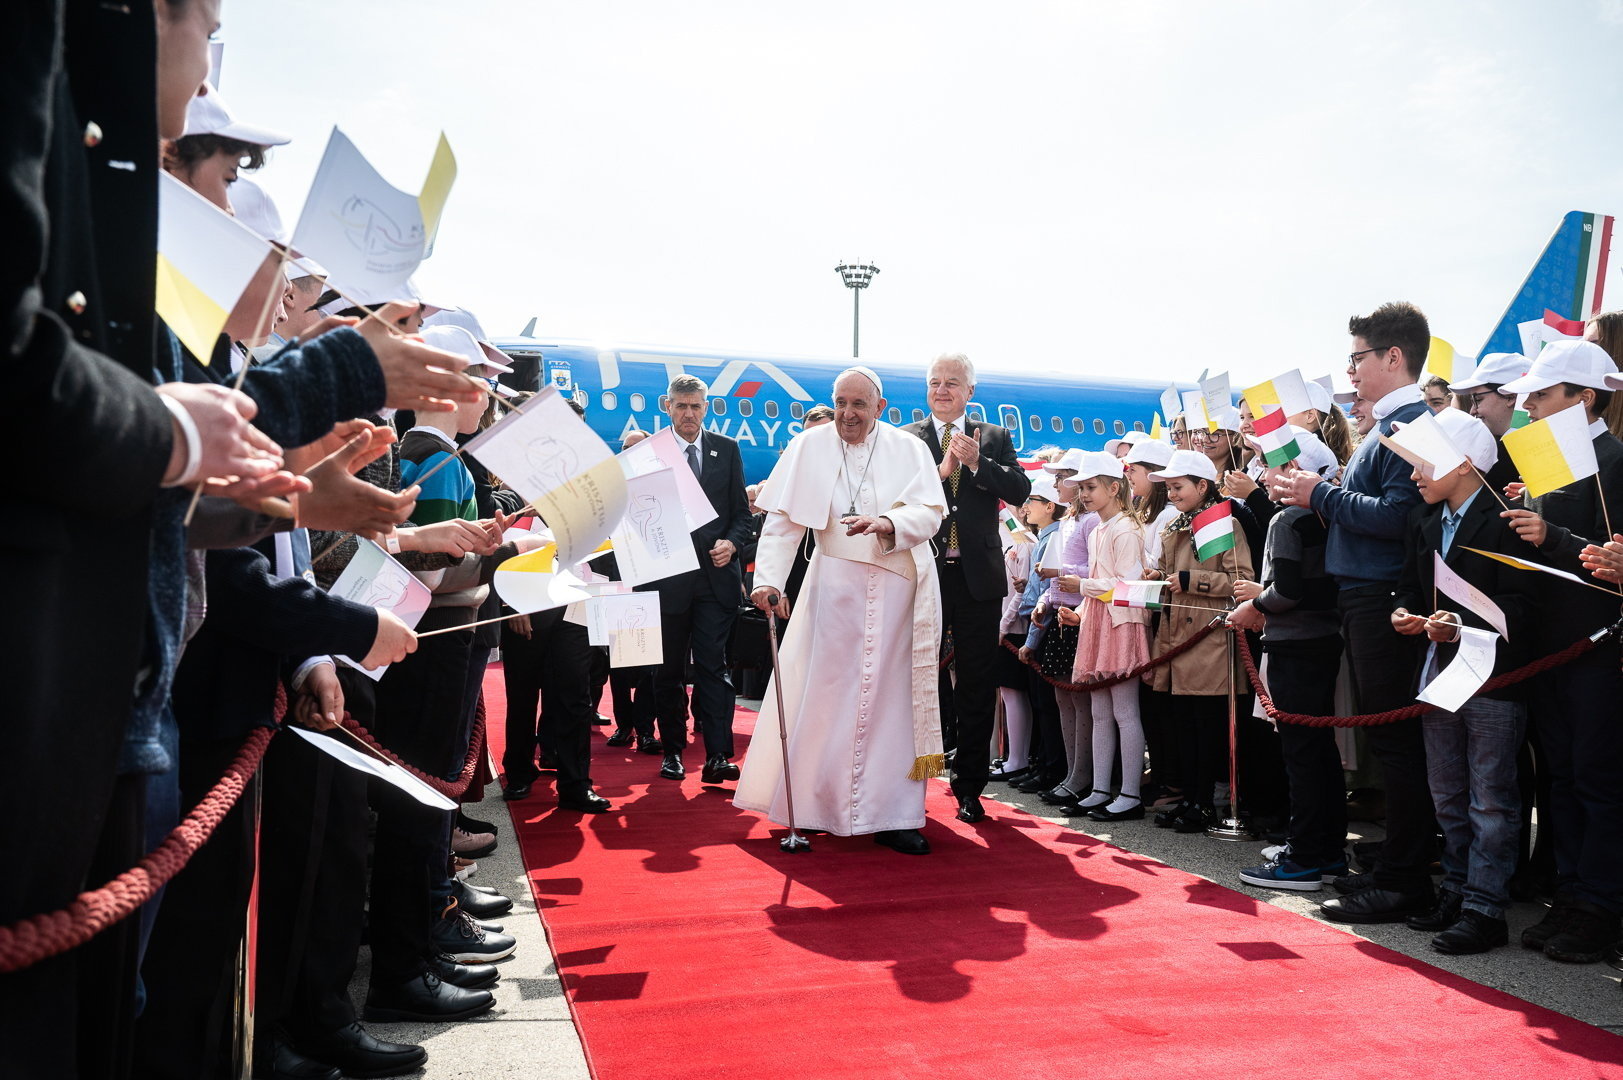 POPE FRANCIS ON A NATION-UNIFYING VISIT TO HUNGARY